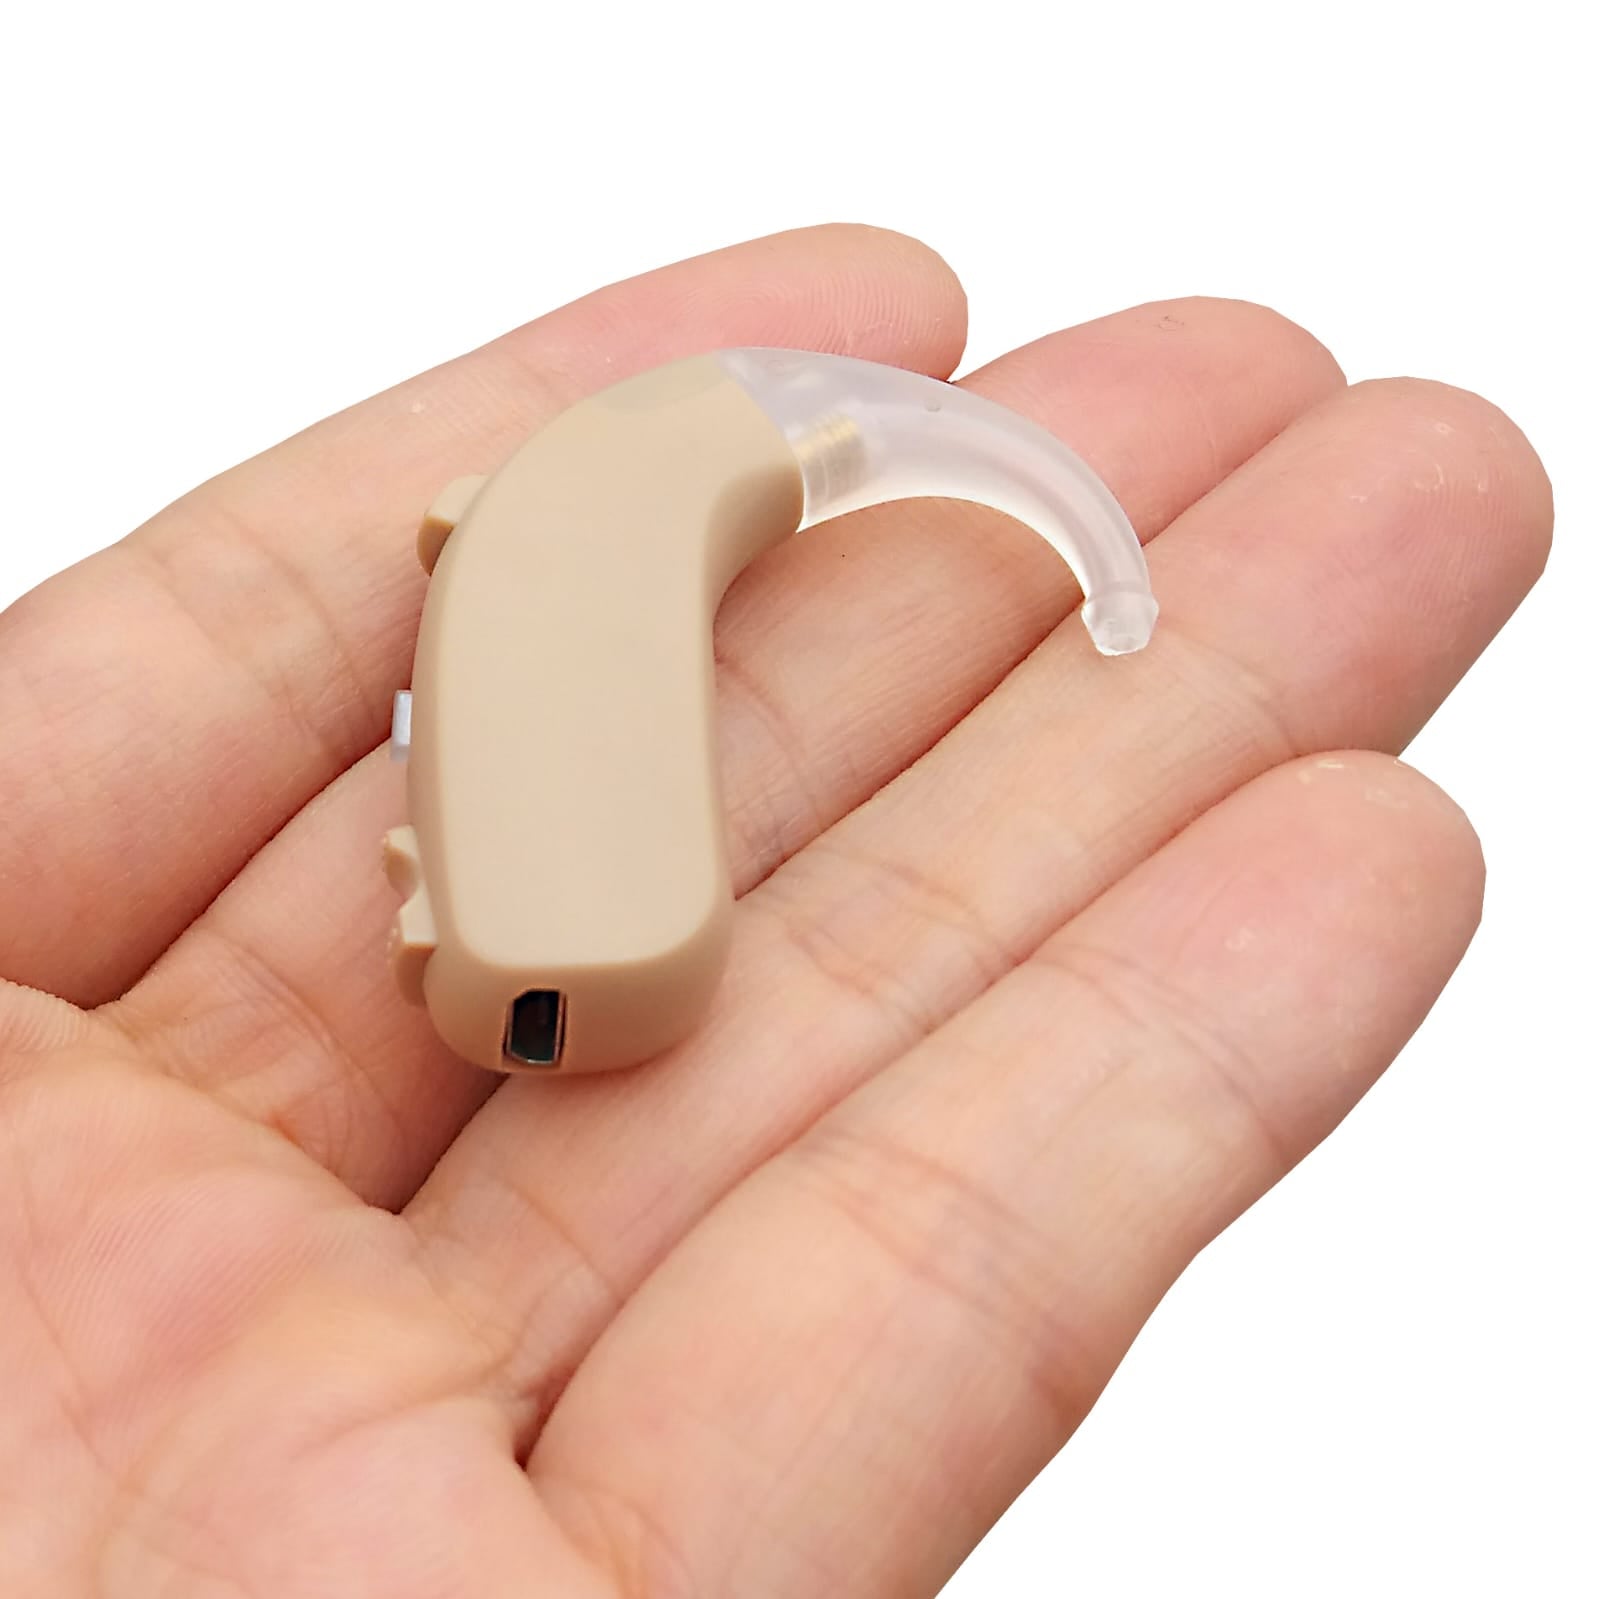 eEAR® Pair of BTE-26 Peak Gain 65db Improved Premium Behind The Ear BTE Rechargeable Digital Hearing Aid Designed for Severe Hearing Loss Designed and Engineered in the USA Sold 20,000+ worldwide